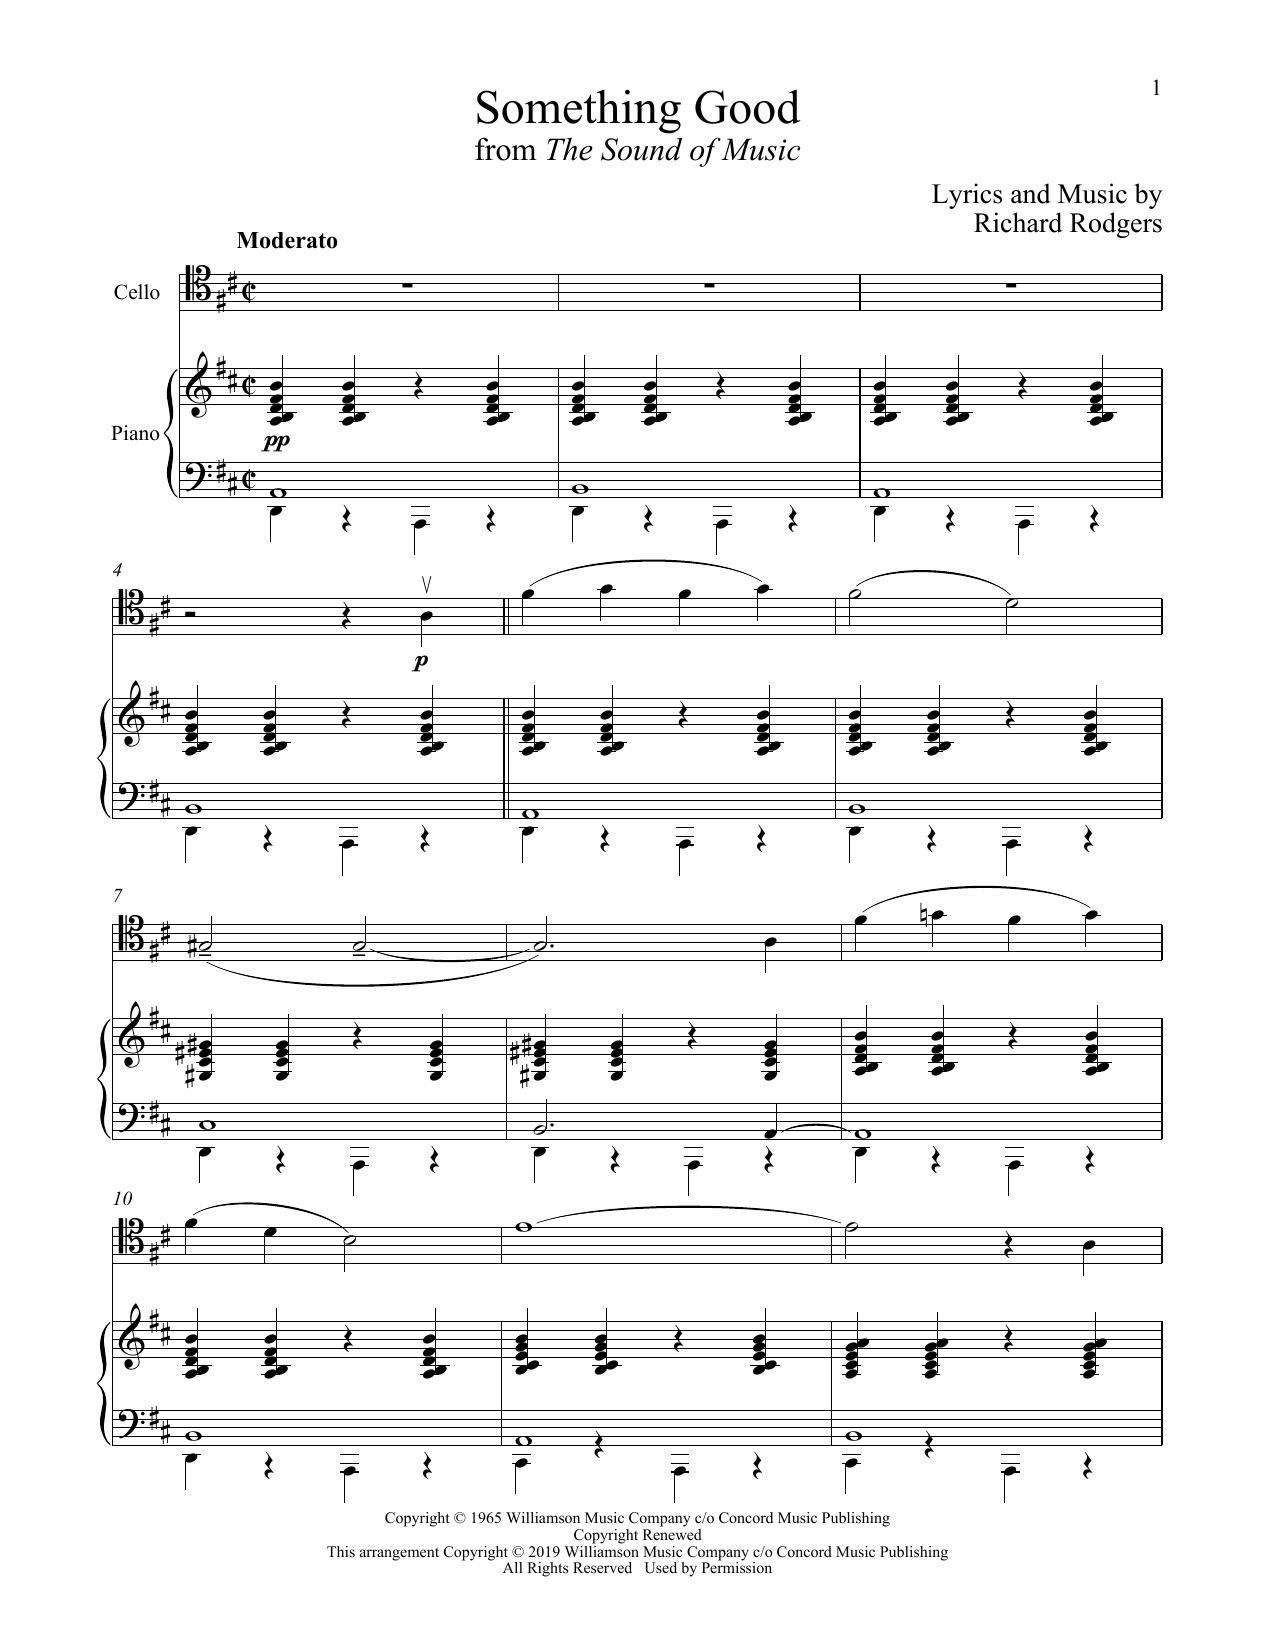 Download Rodgers & Hammerstein Something Good (from The Sound of Music Sheet Music